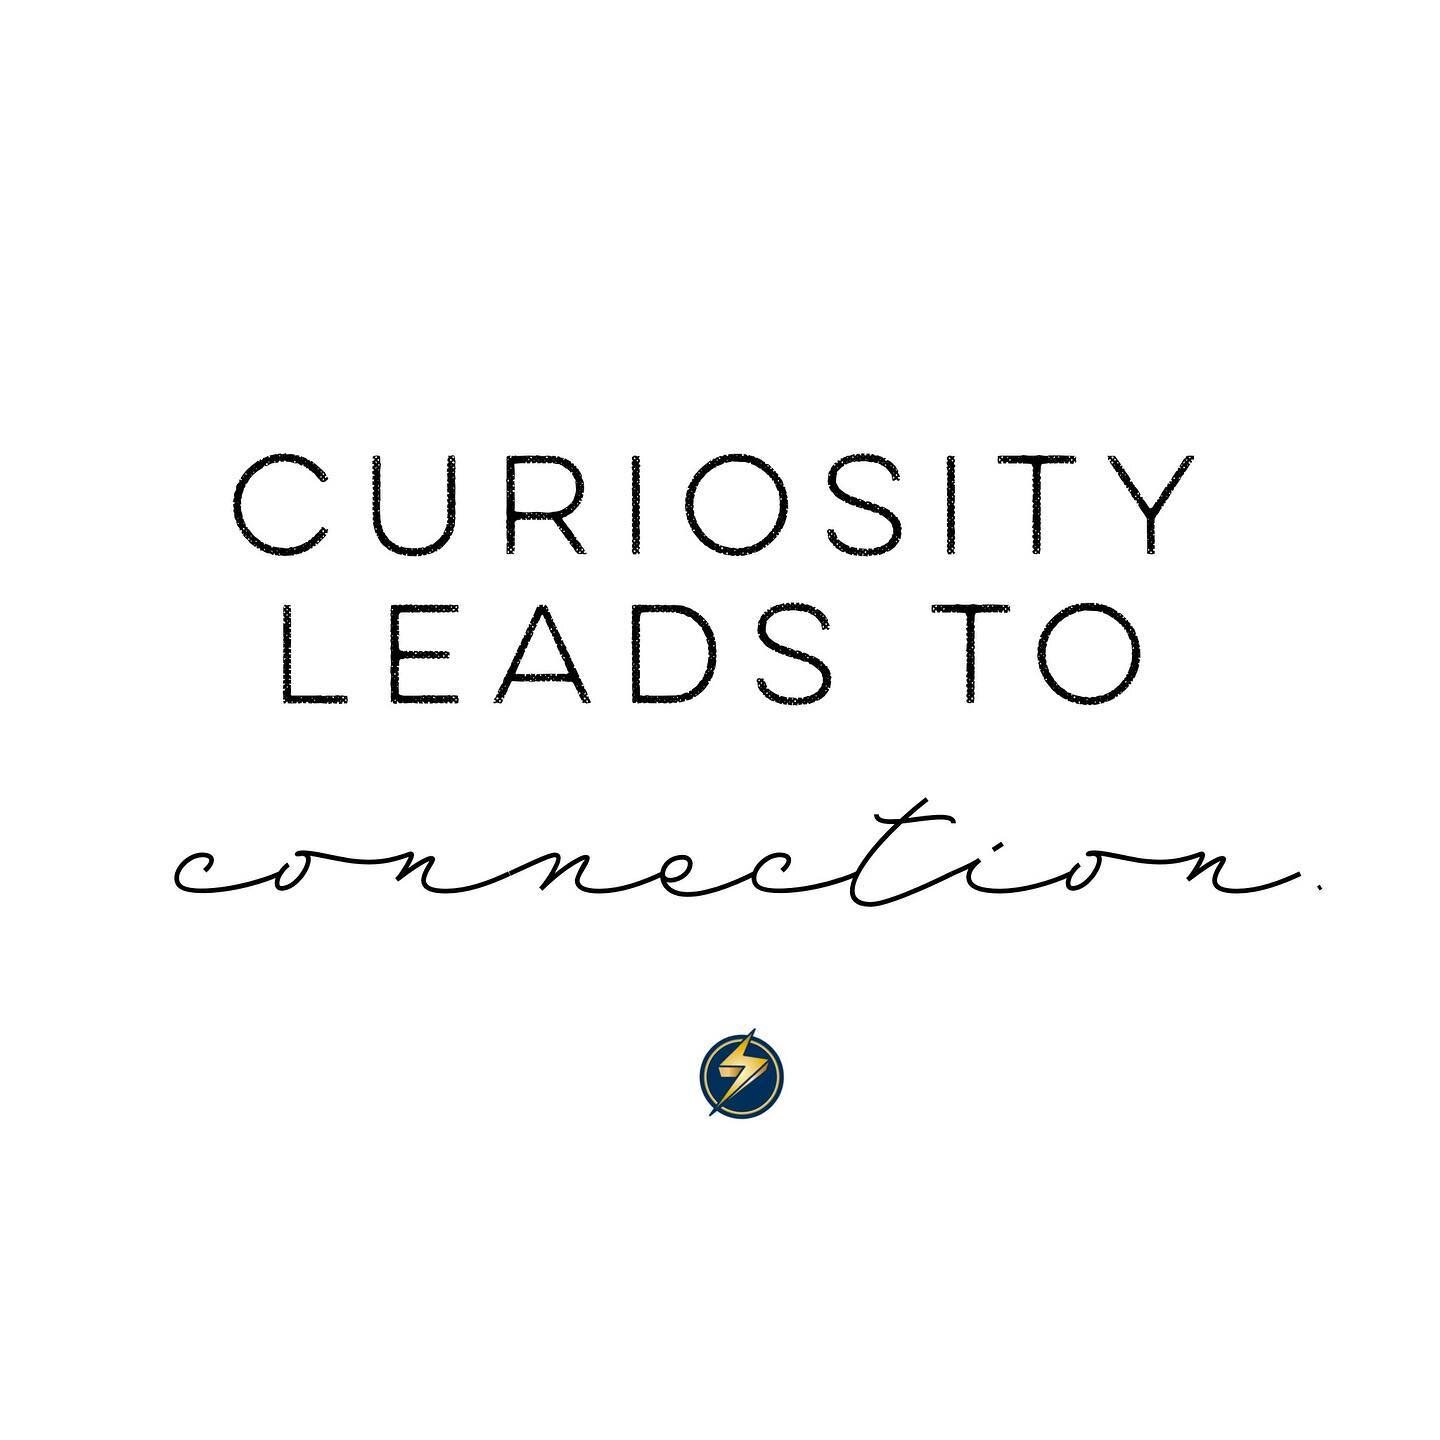 Curiosity may have killed the cat, but it certainly did NOT kill the couple. In fact, curiosity made it stronger.

When I think of curiosity, I think of openness and possibilities. I think of flexibility and connection. It&rsquo;s the opposite of kno